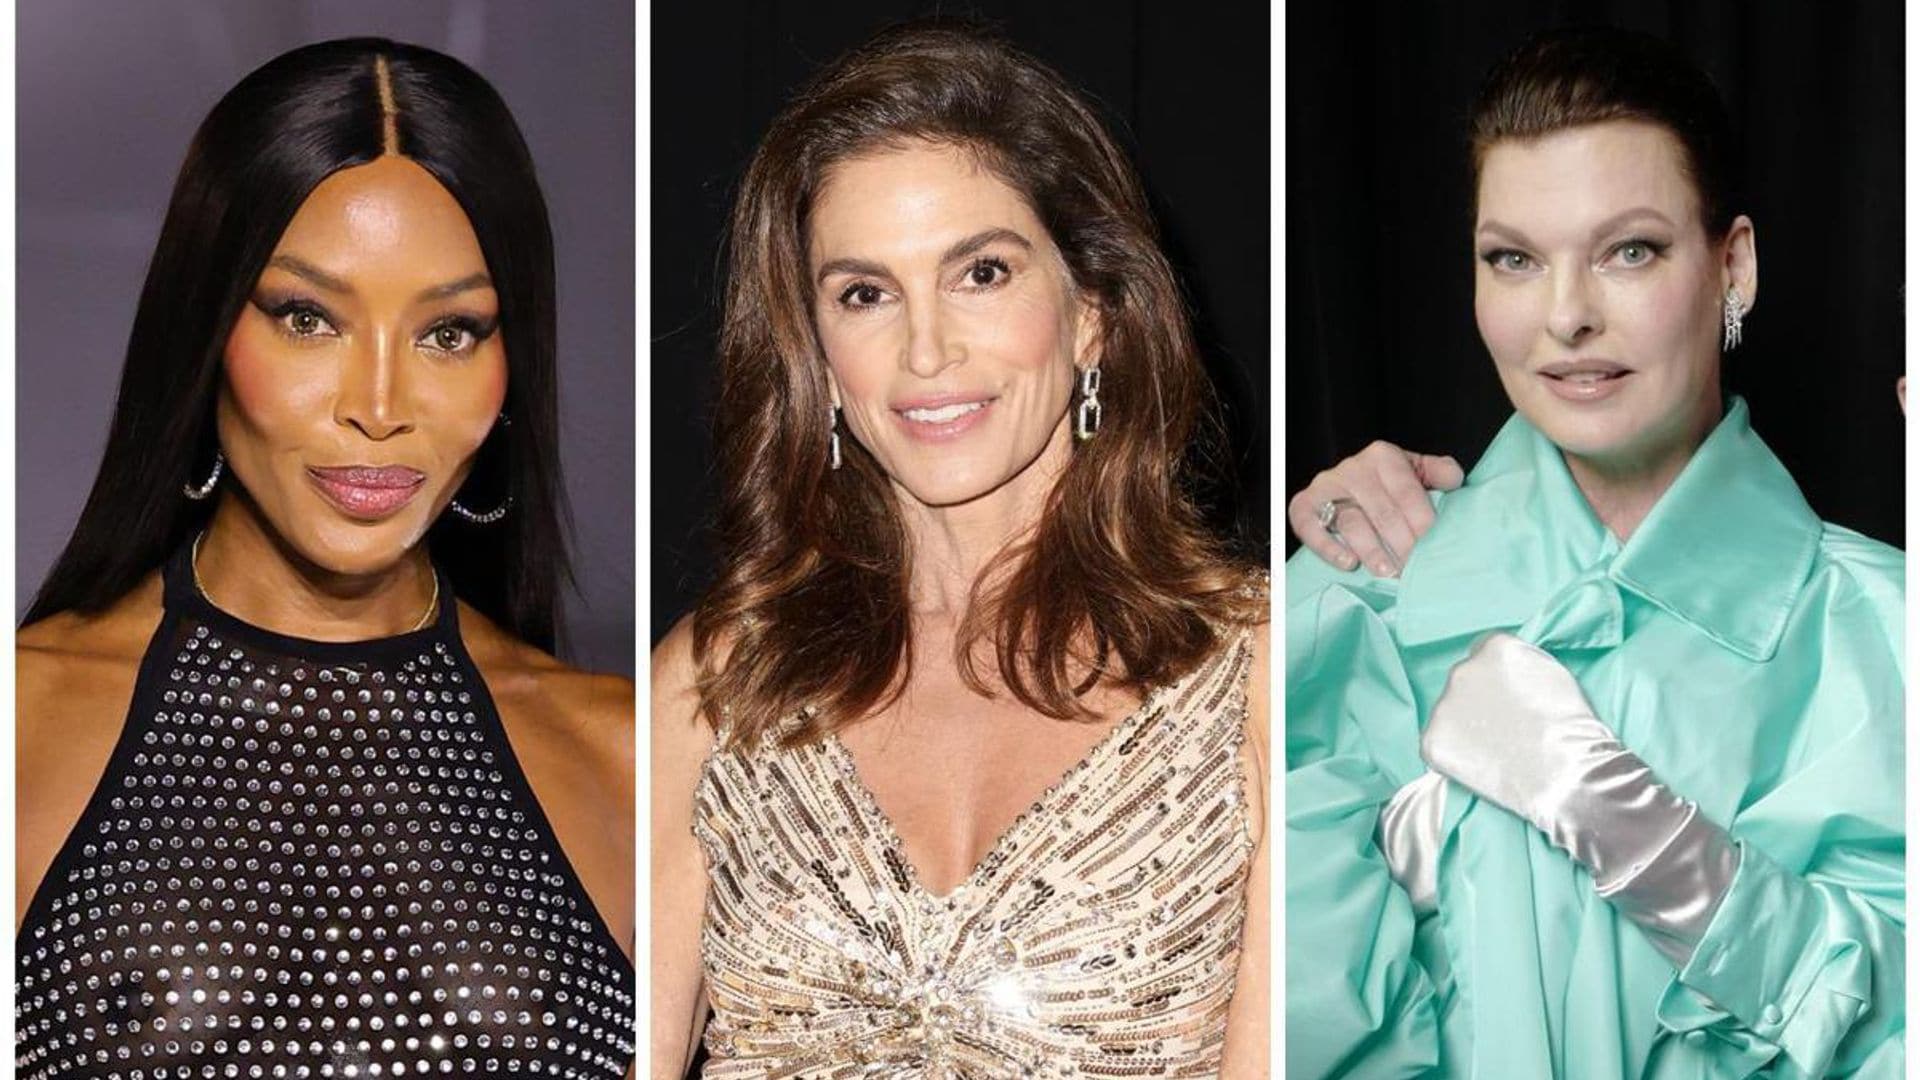 When, where to watch Naomi Campbell, Cindy Crawford, and Linda Evangelista docuseries